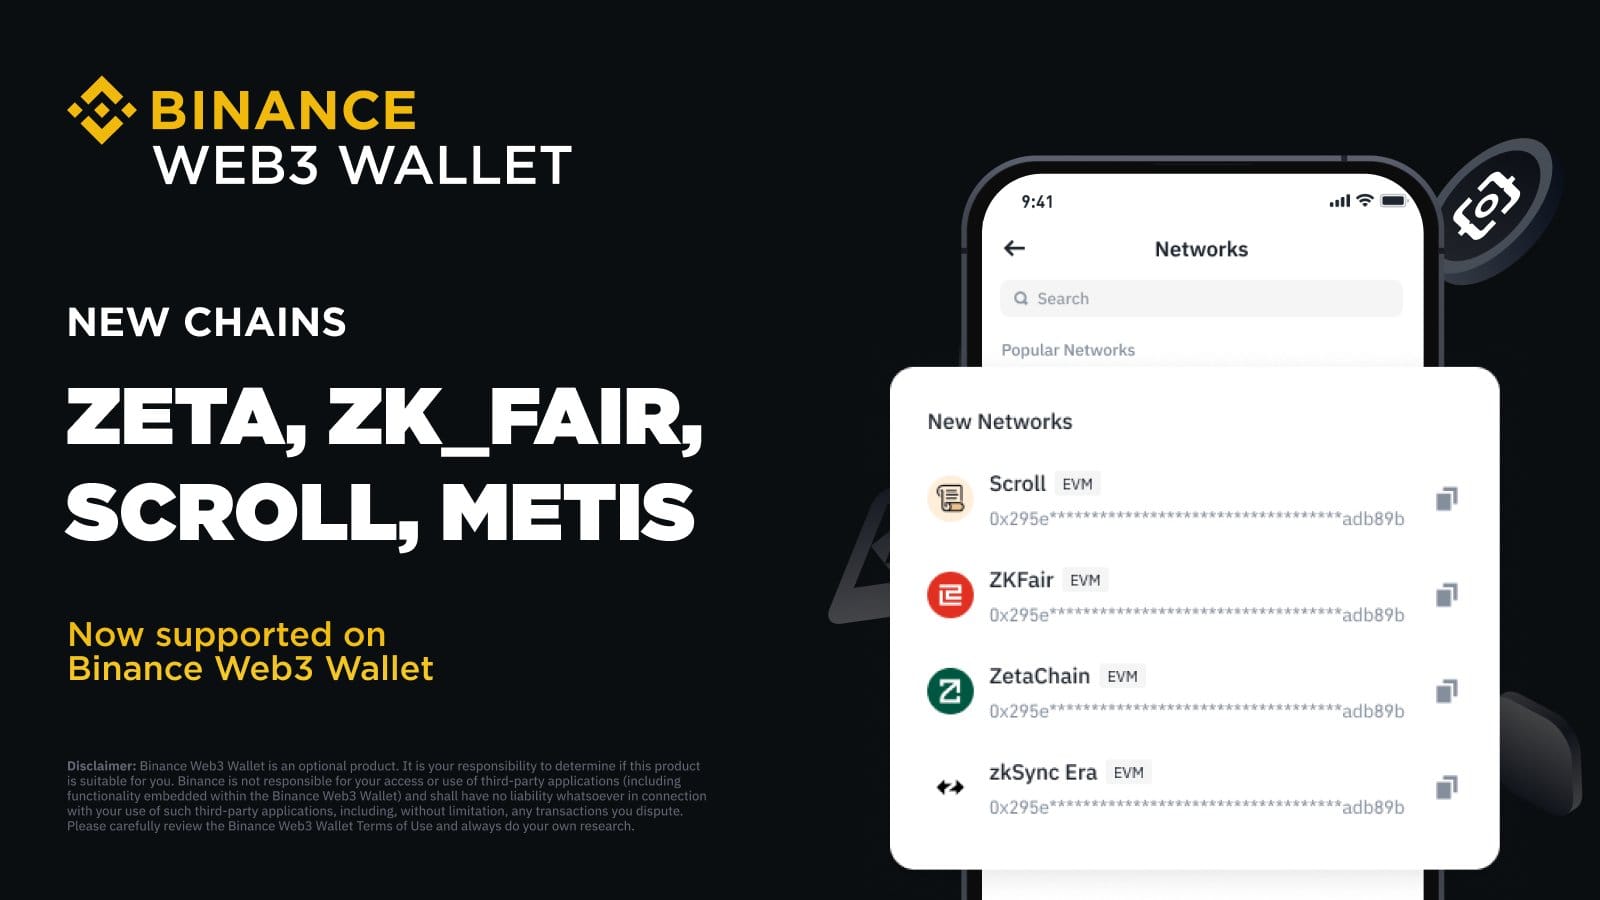 Binance Web3 Wallet  added new chains